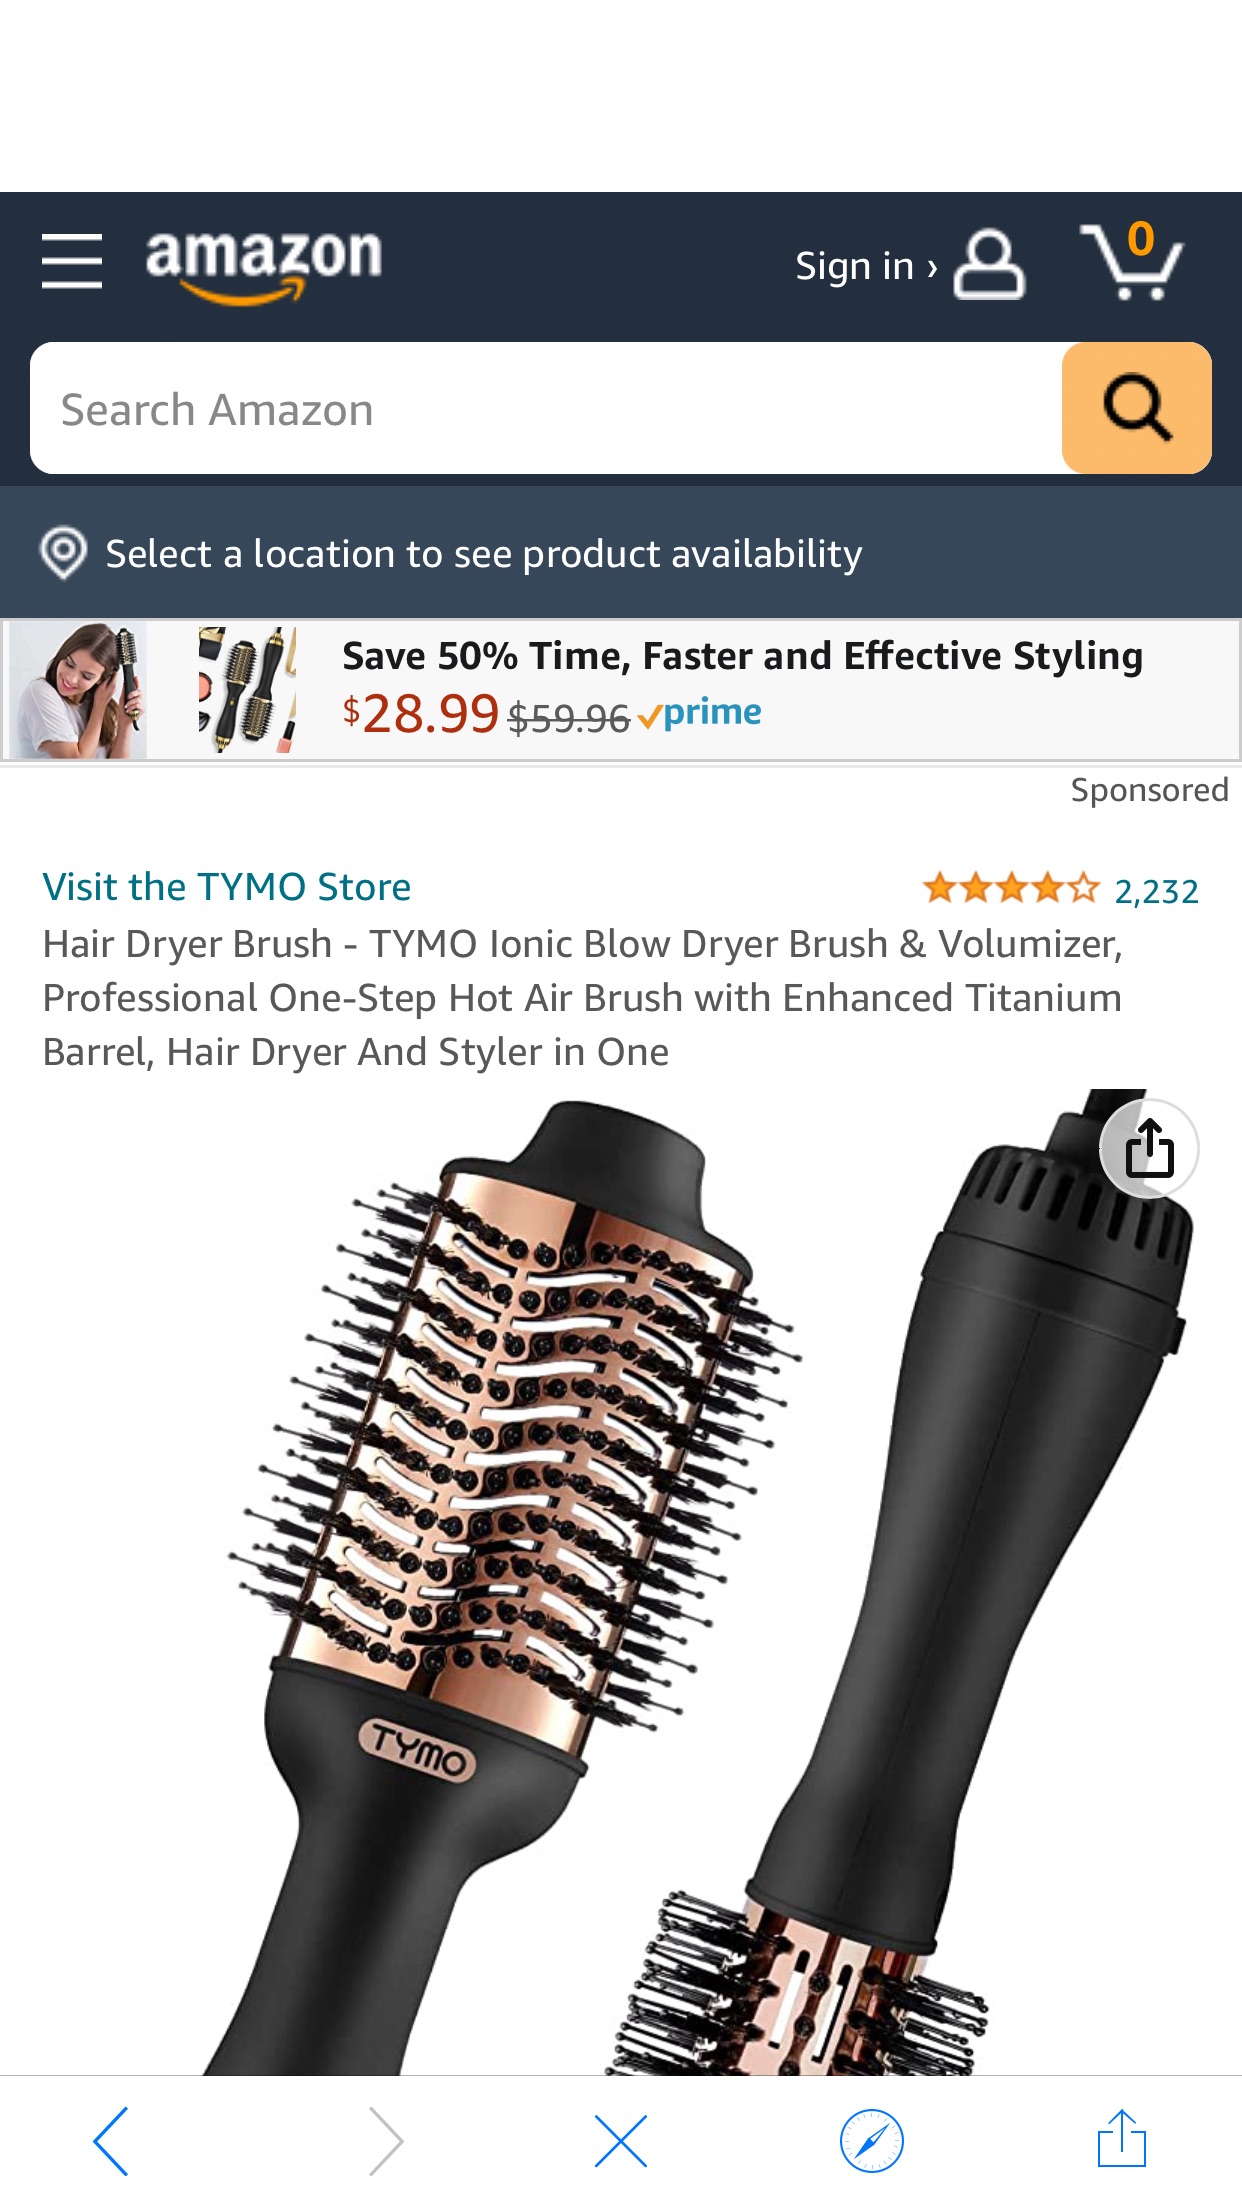 Amazon.com : Hair Dryer Brush - TYMO Ionic Blow Dryer Brush & Volumizer, Professional One-Step Hot Air Brus in One : Beauty & Personal Care卷发棒